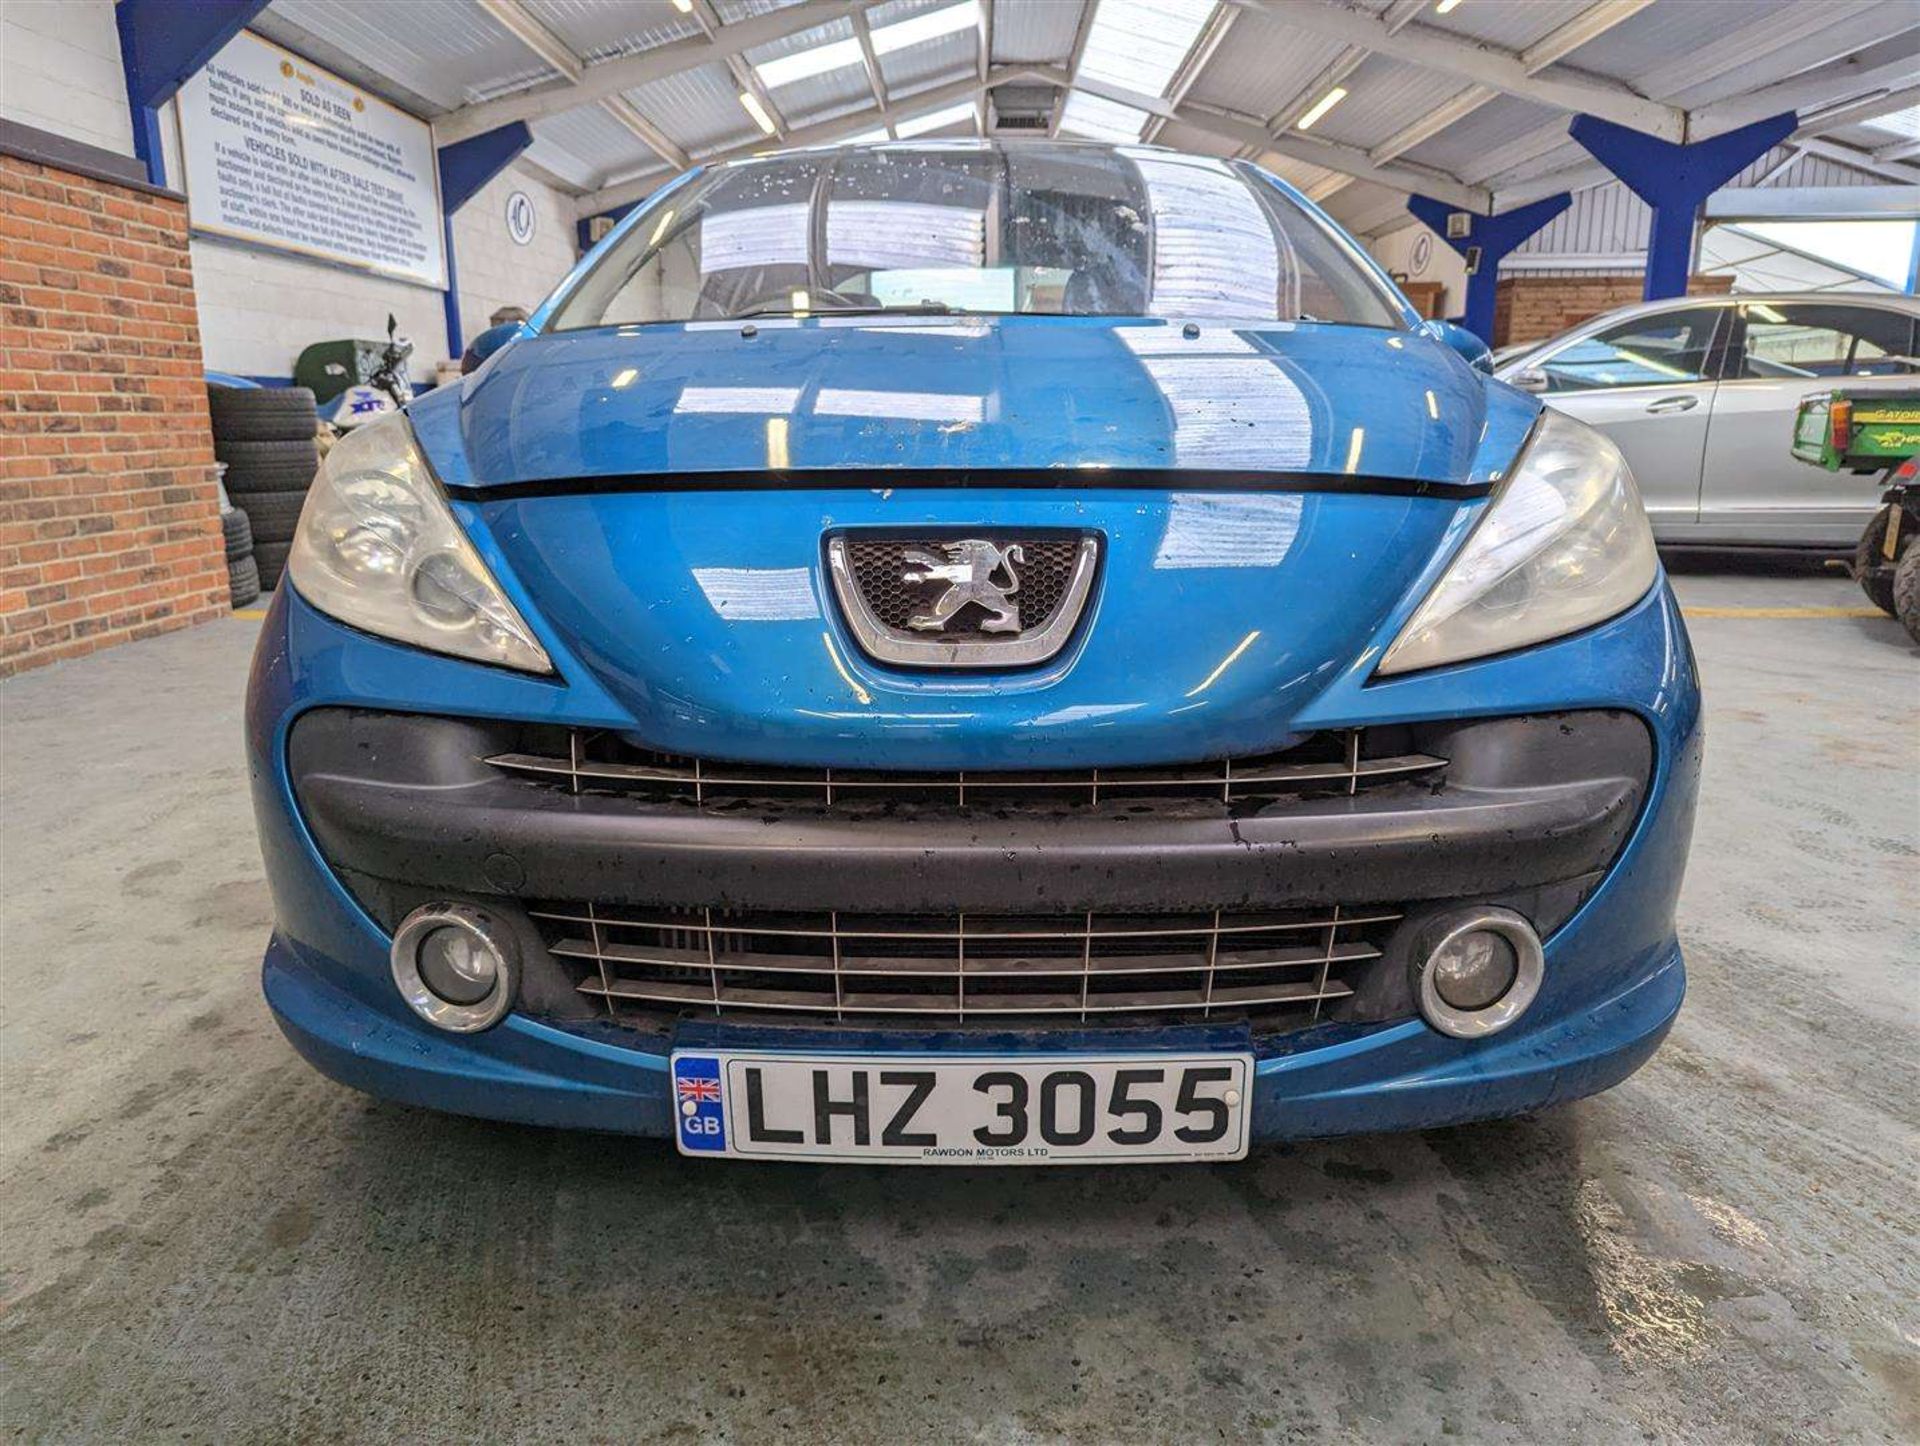 2007 PEUGEOT 207 GT HDI 110 - Image 30 of 30